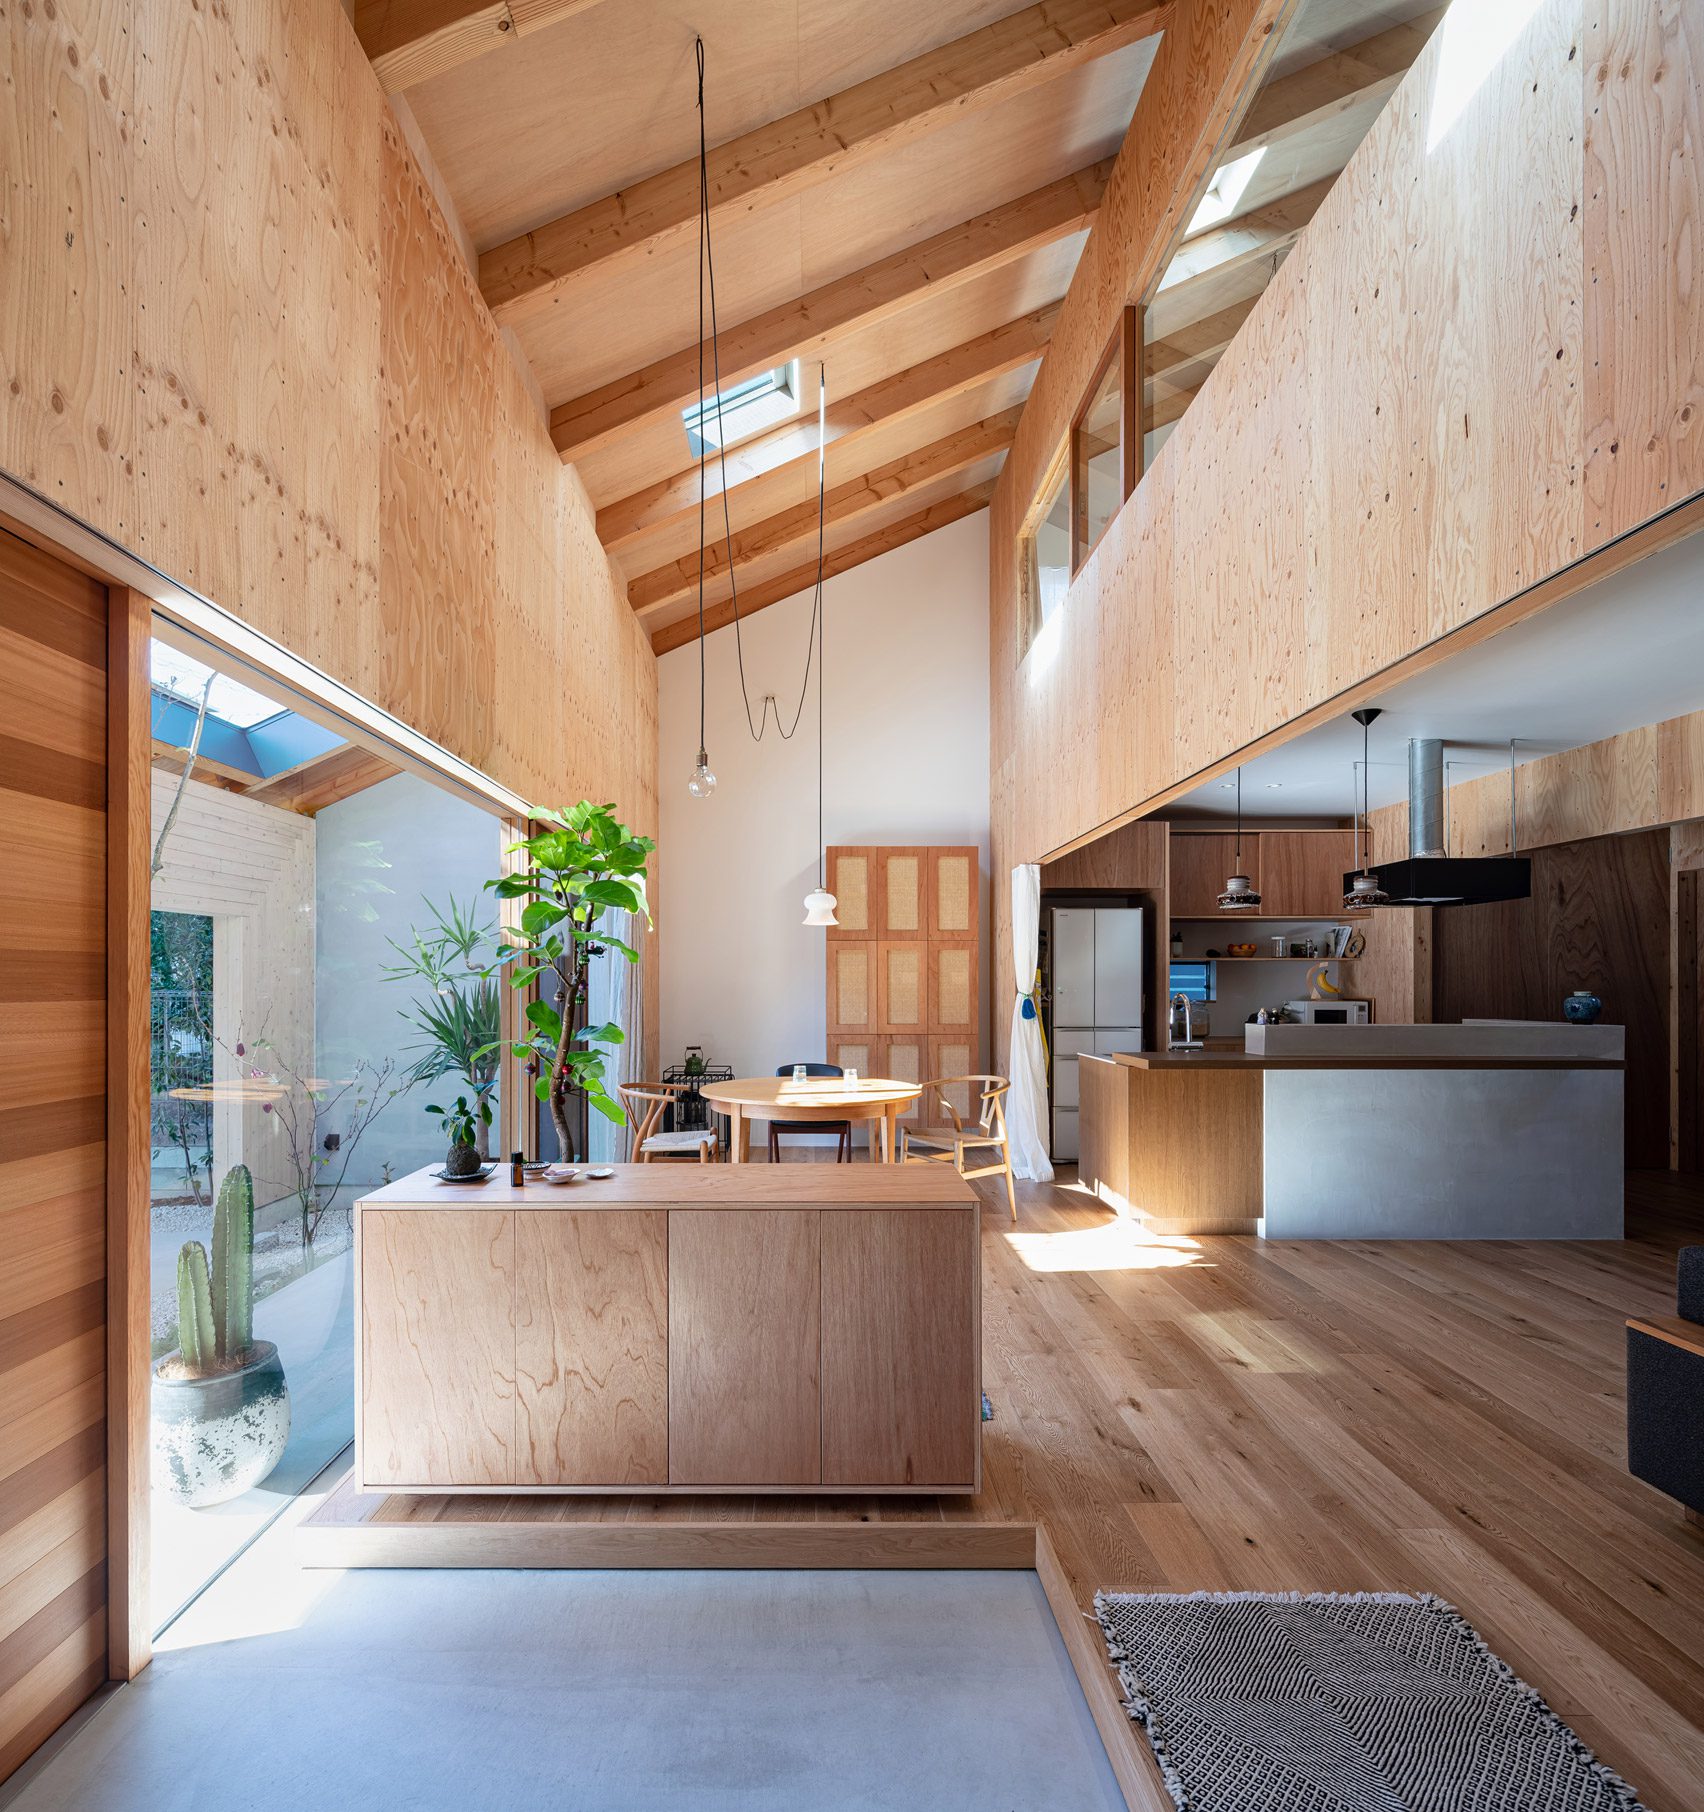 Wooden interiors of Imaise House in Japan